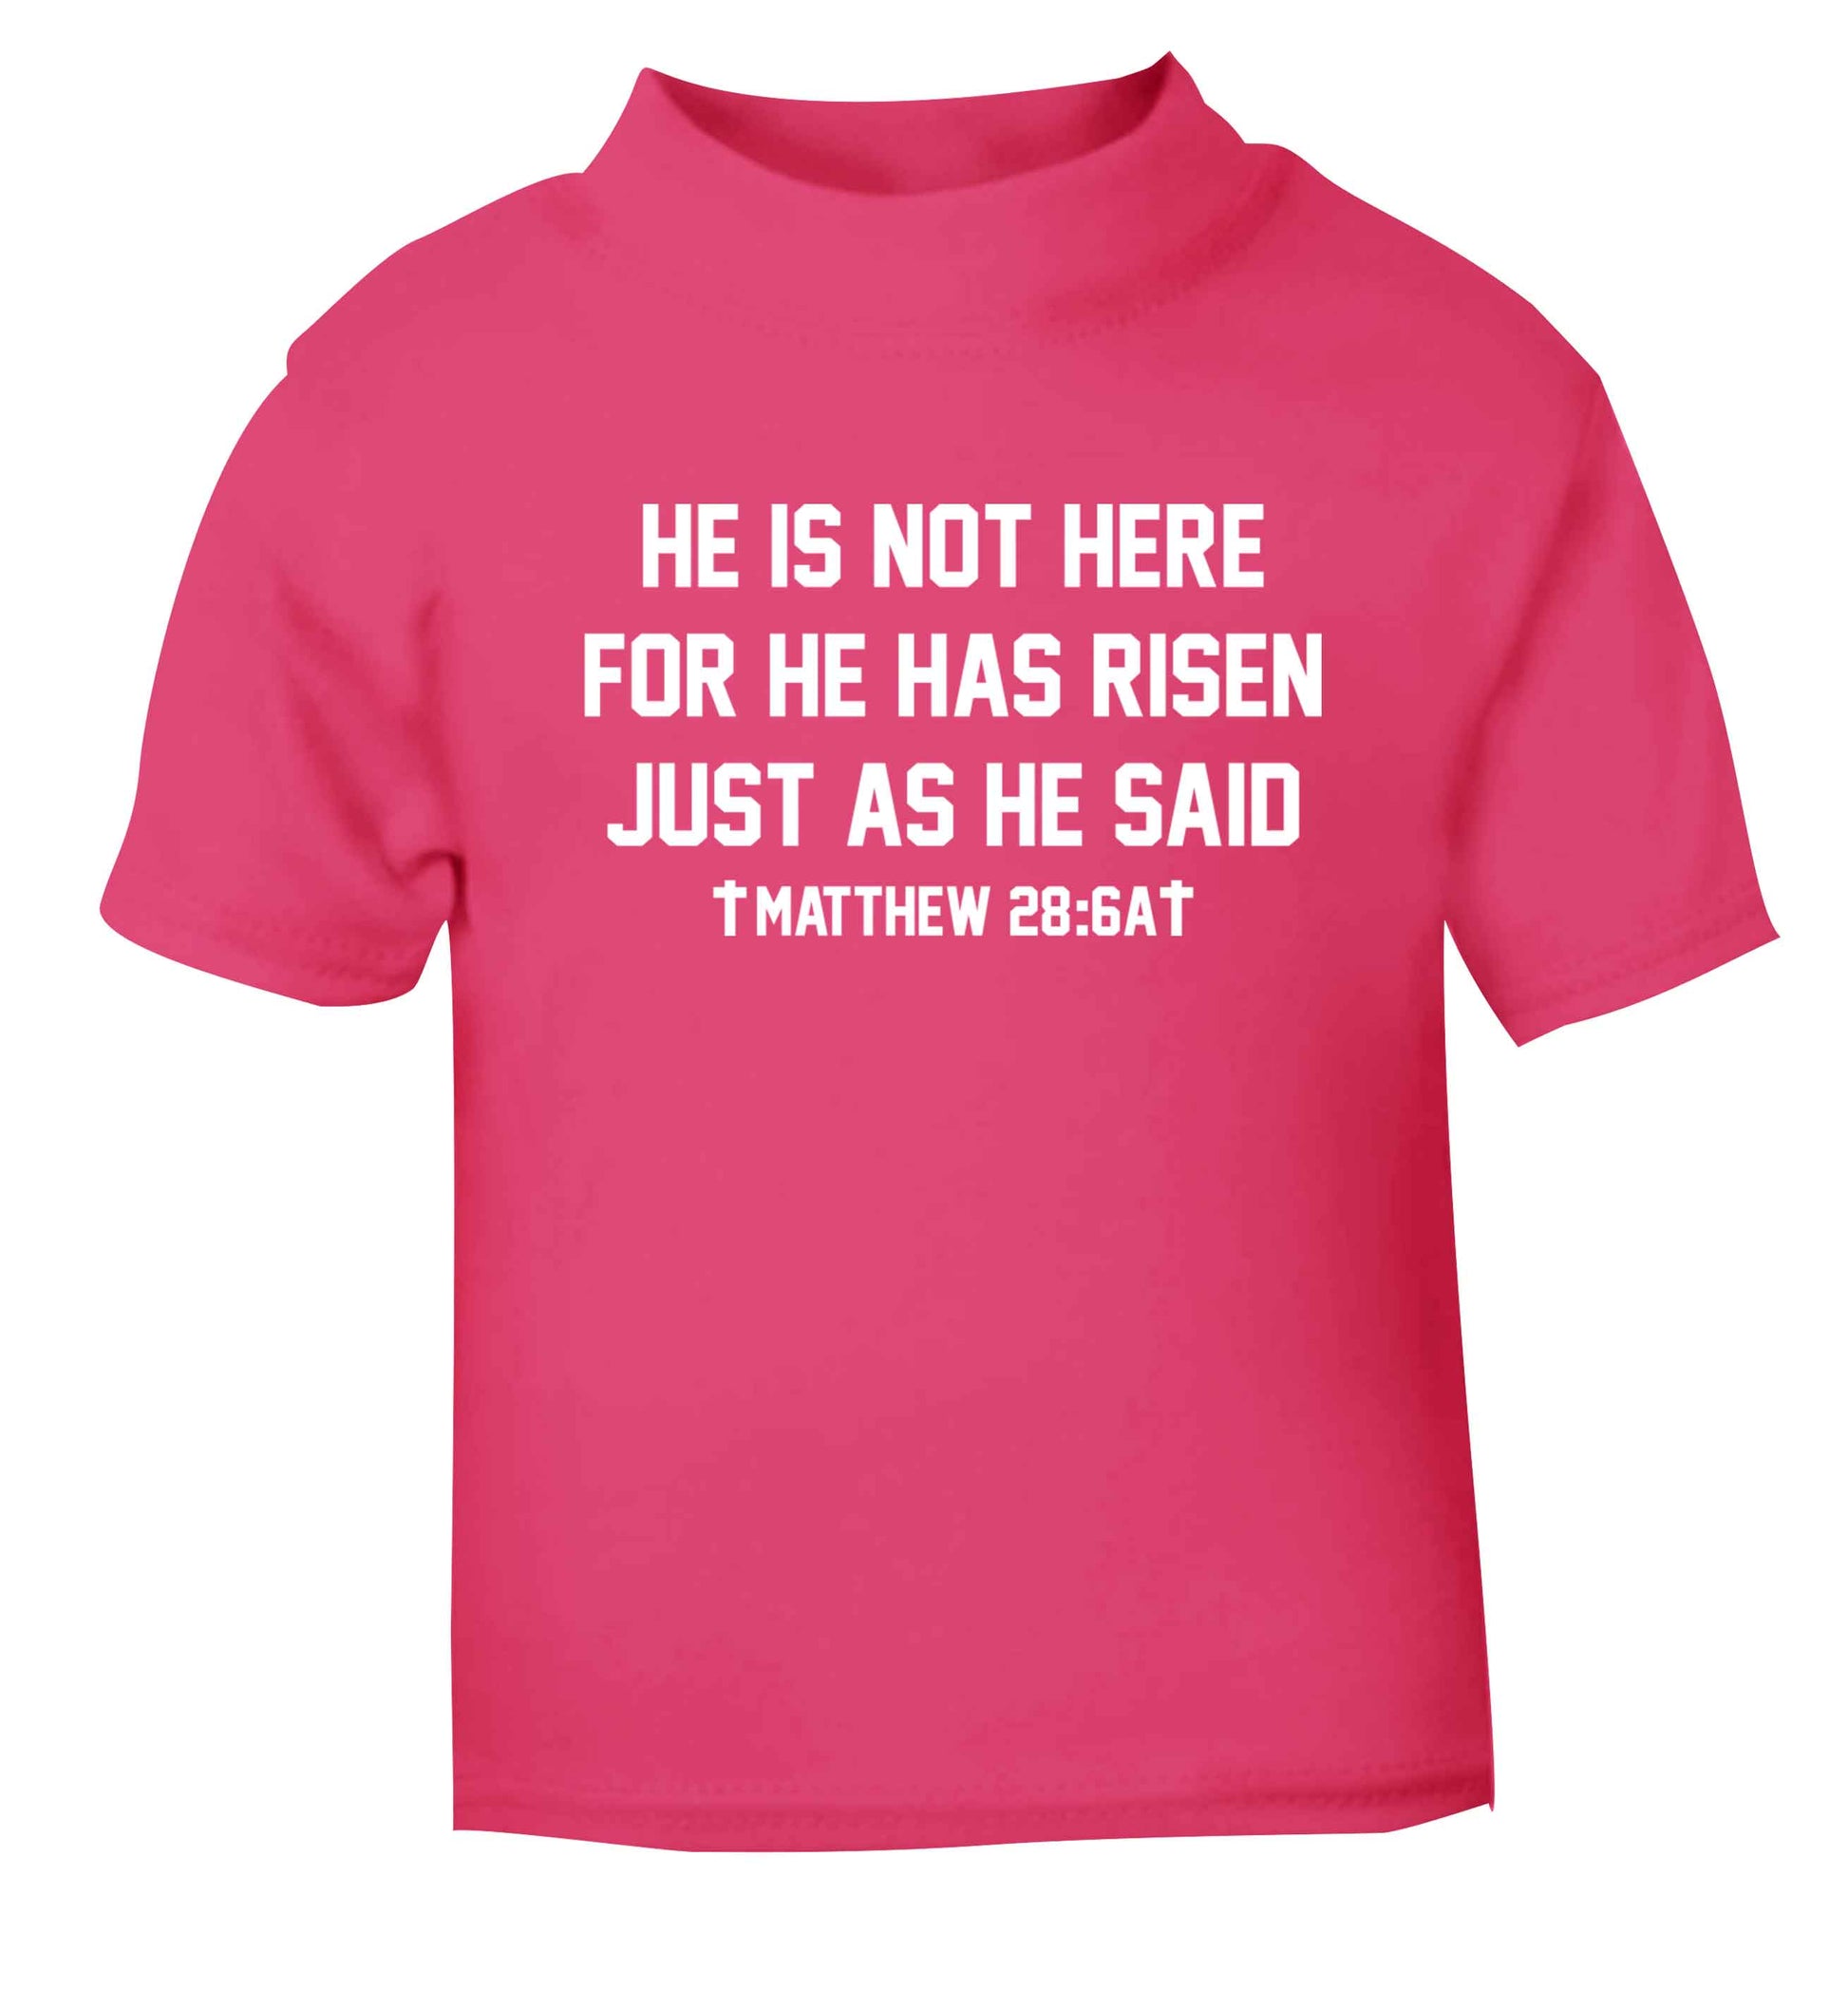 He is not here for he has risen just as he said matthew 28:6A pink baby toddler Tshirt 2 Years